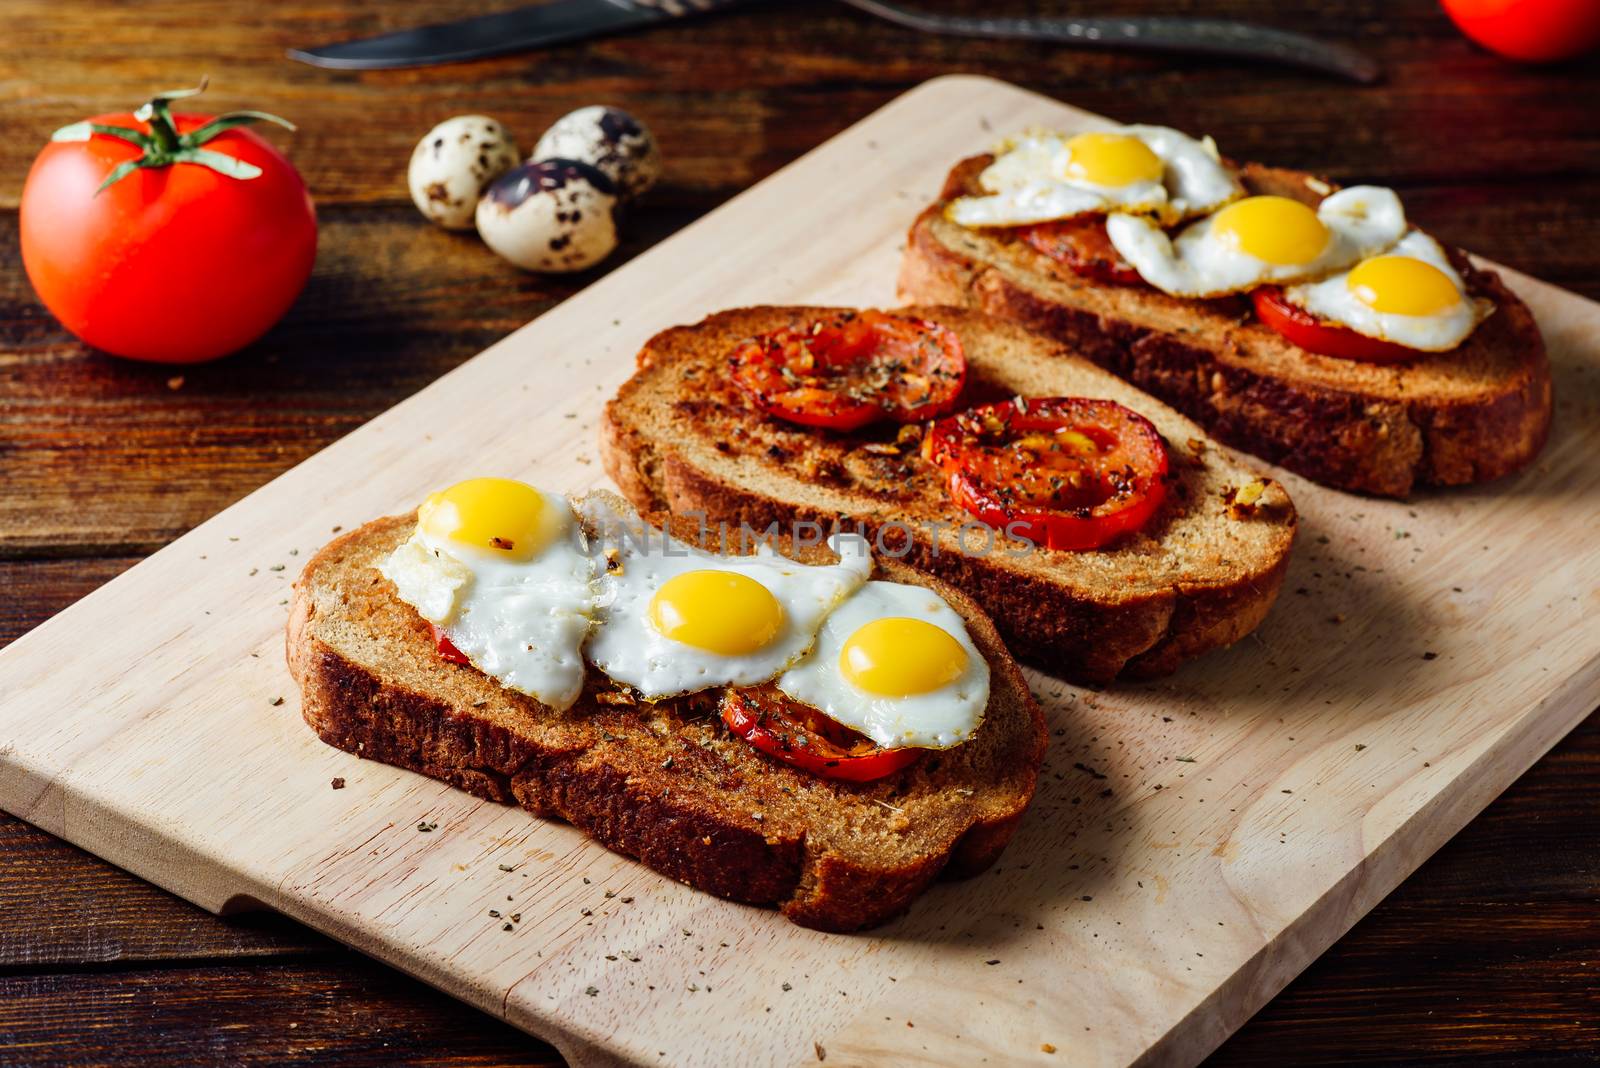 Toasts with Tomatoes and Eggs by Seva_blsv